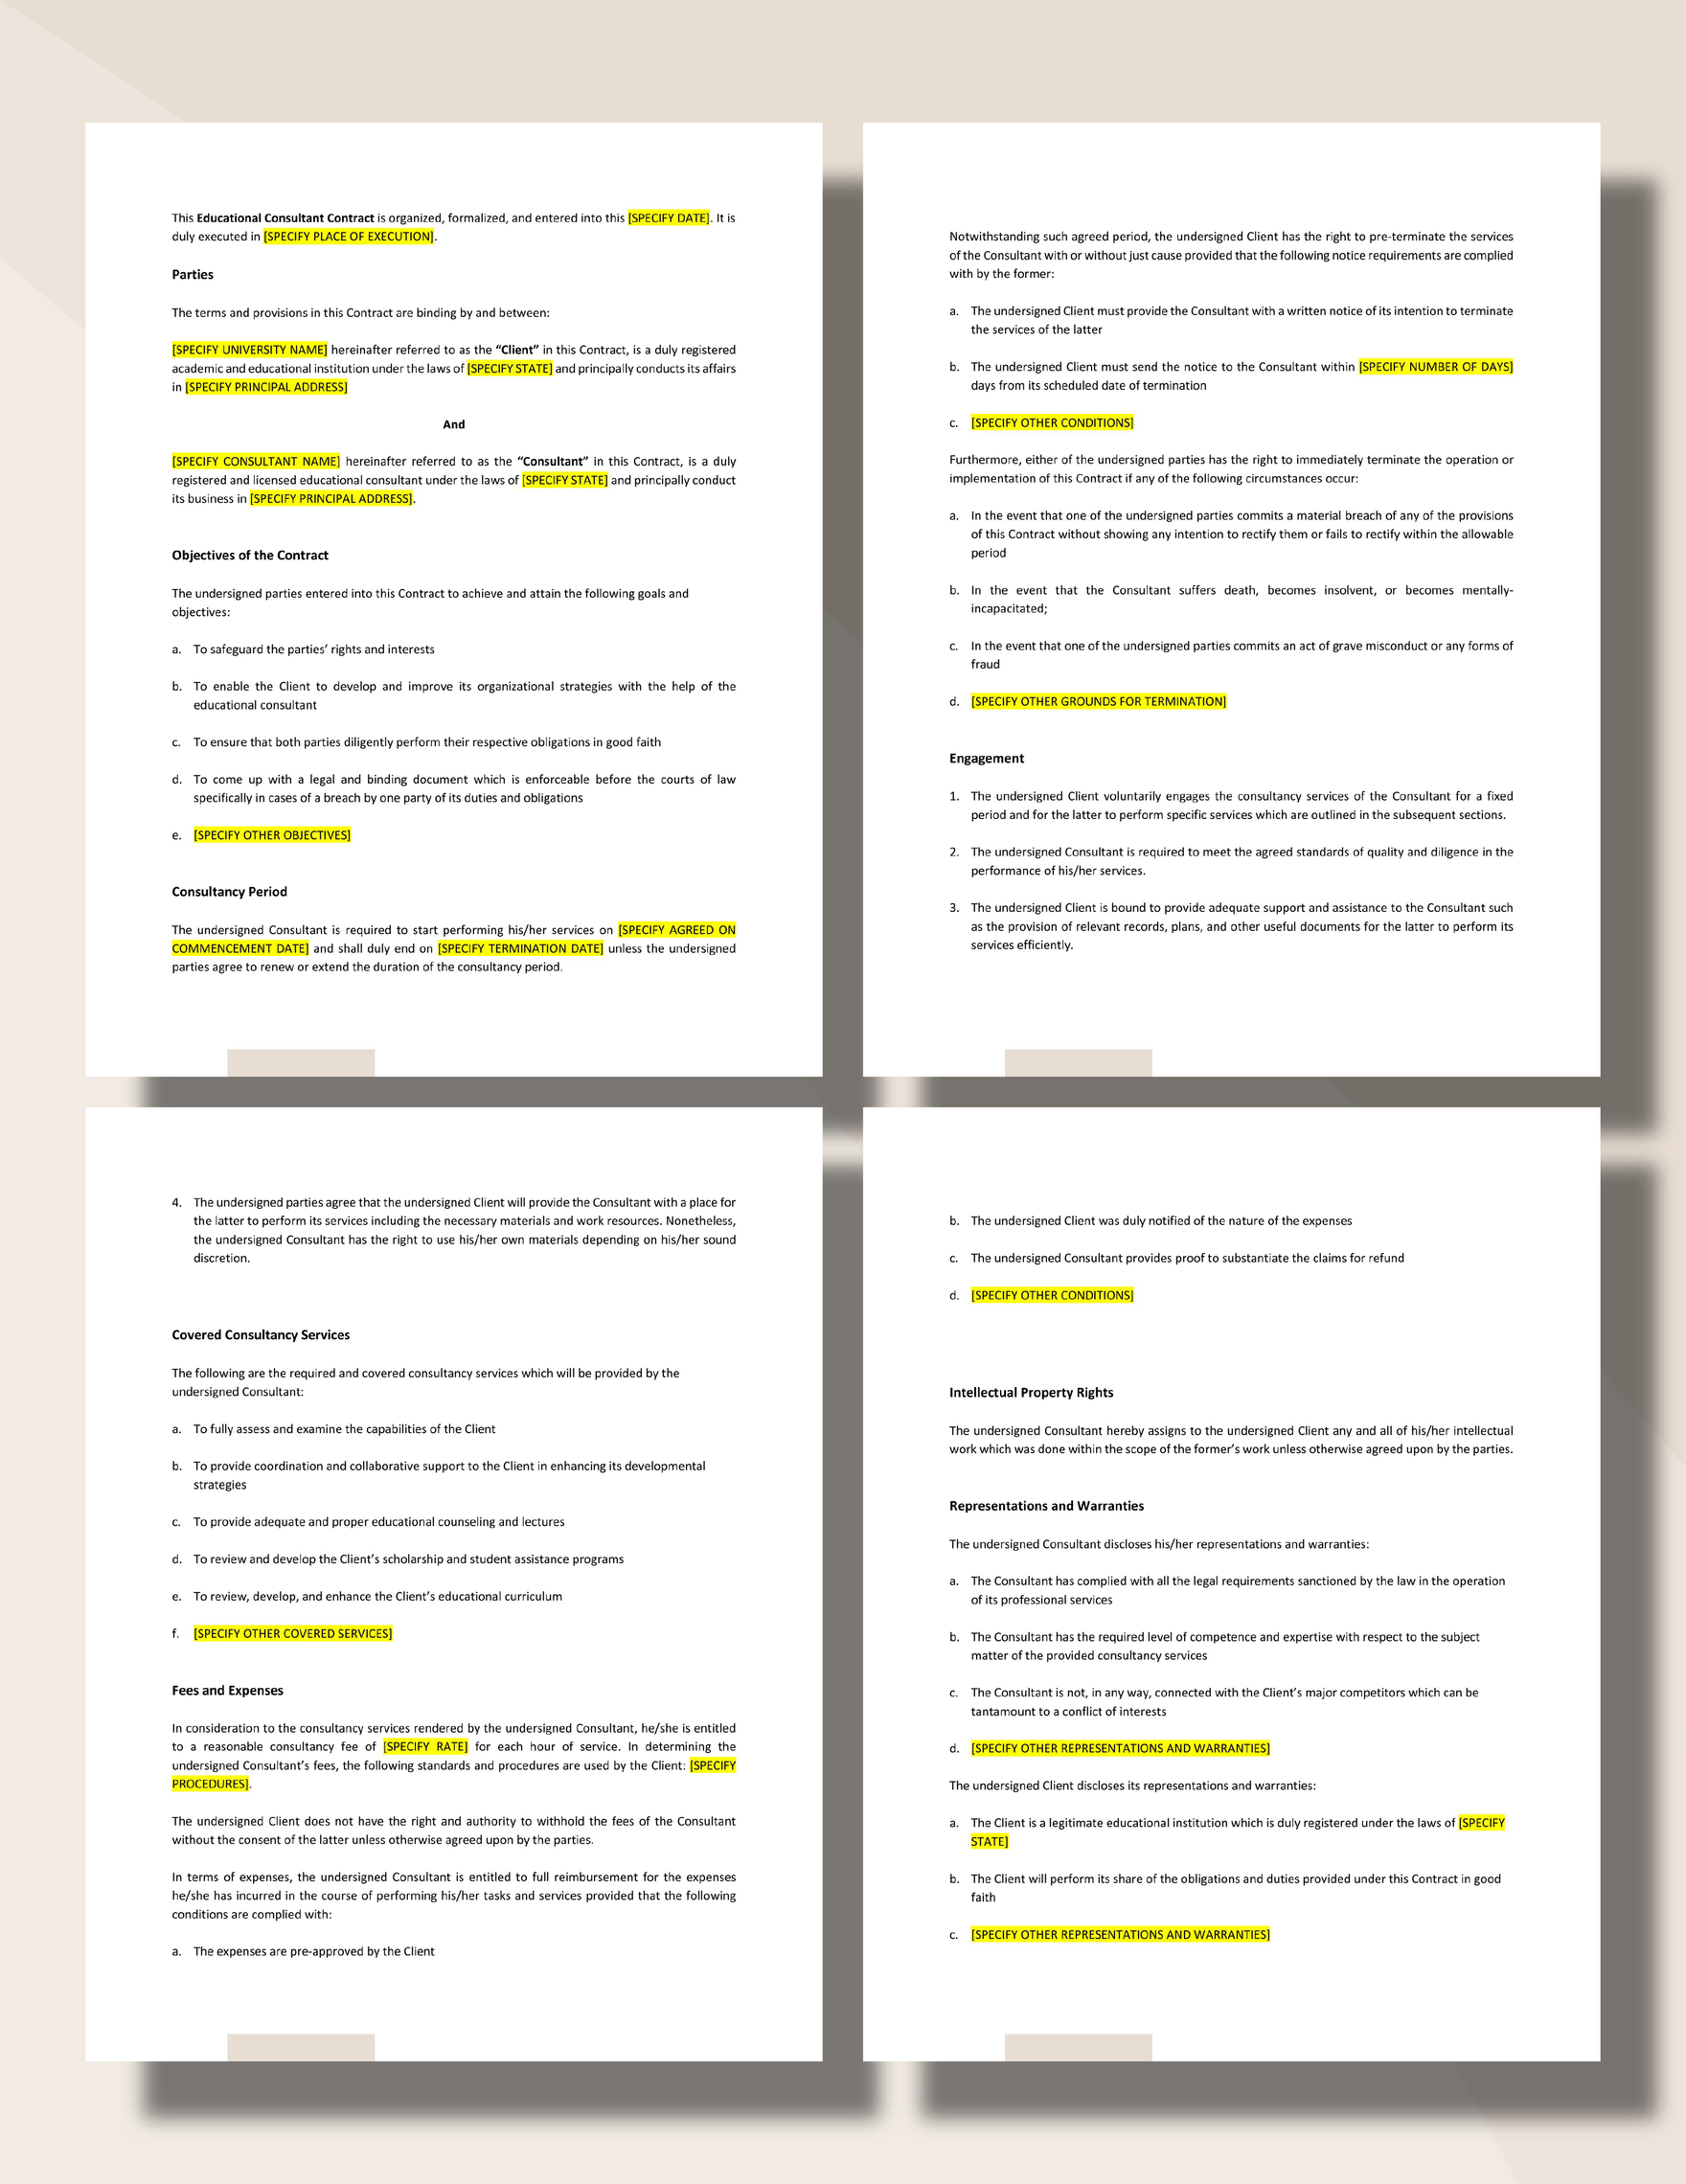 Educational Consultant Contract Template